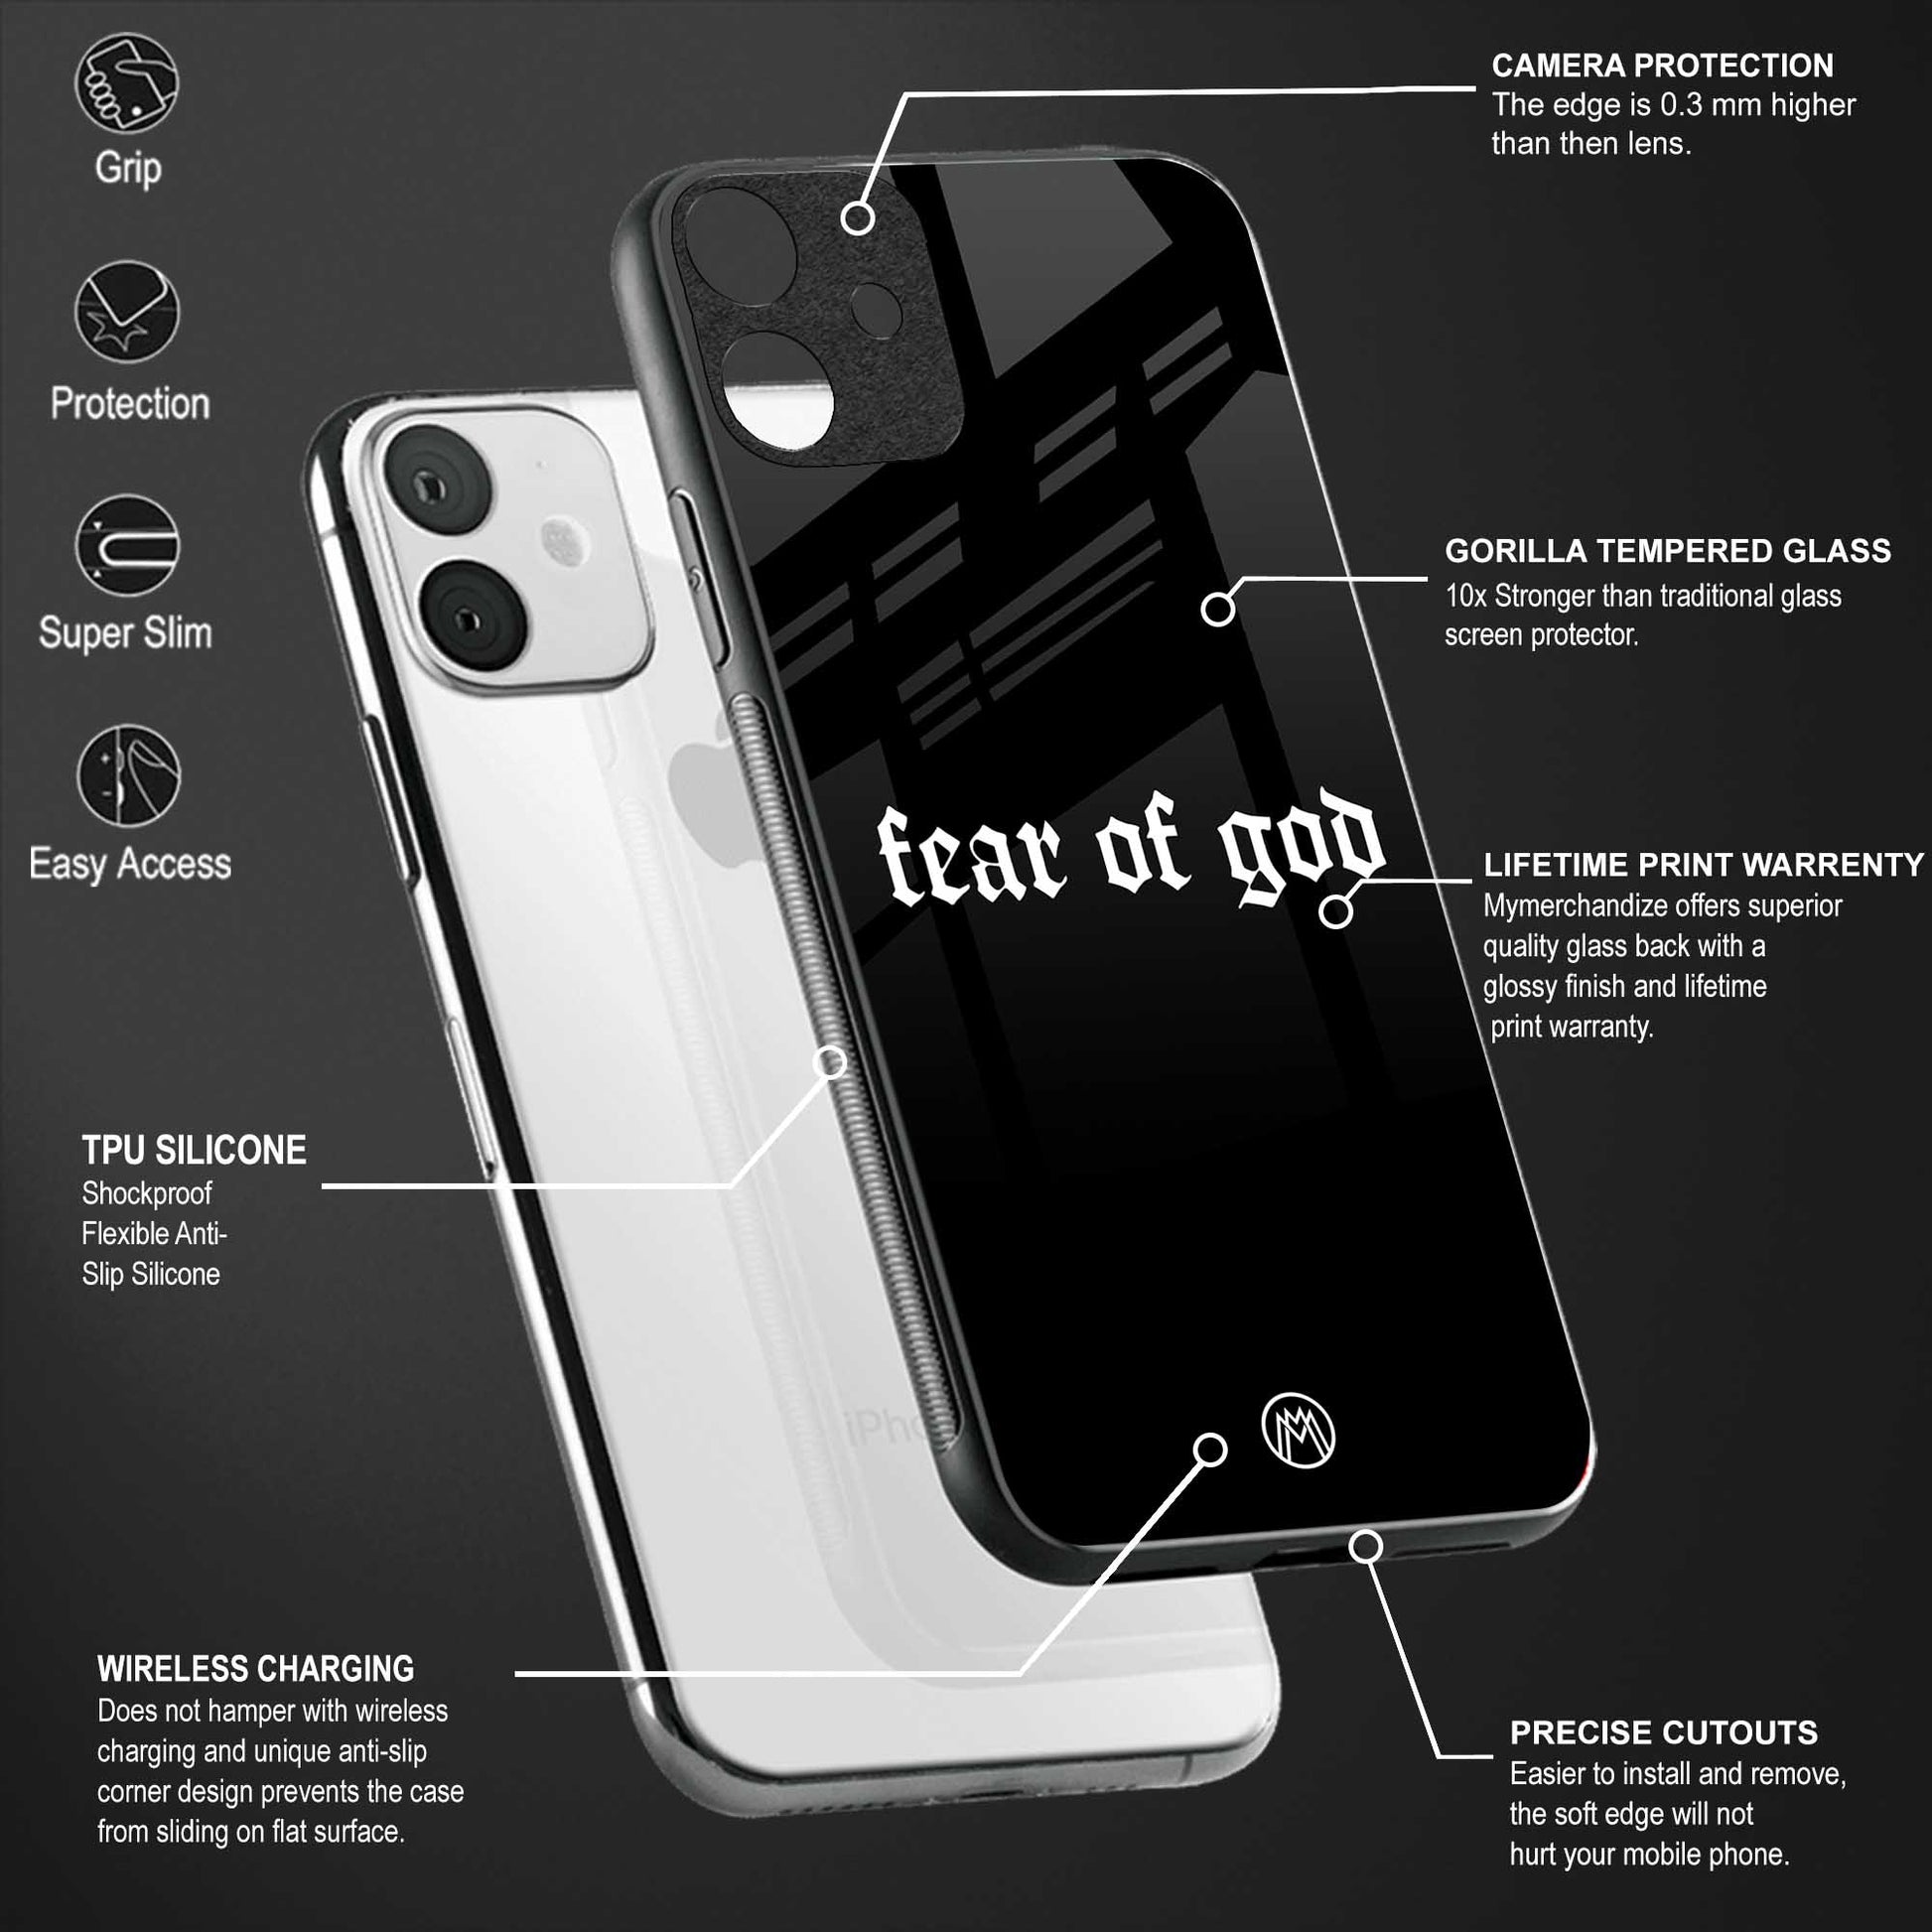 fear of god phone cover for samsung a11